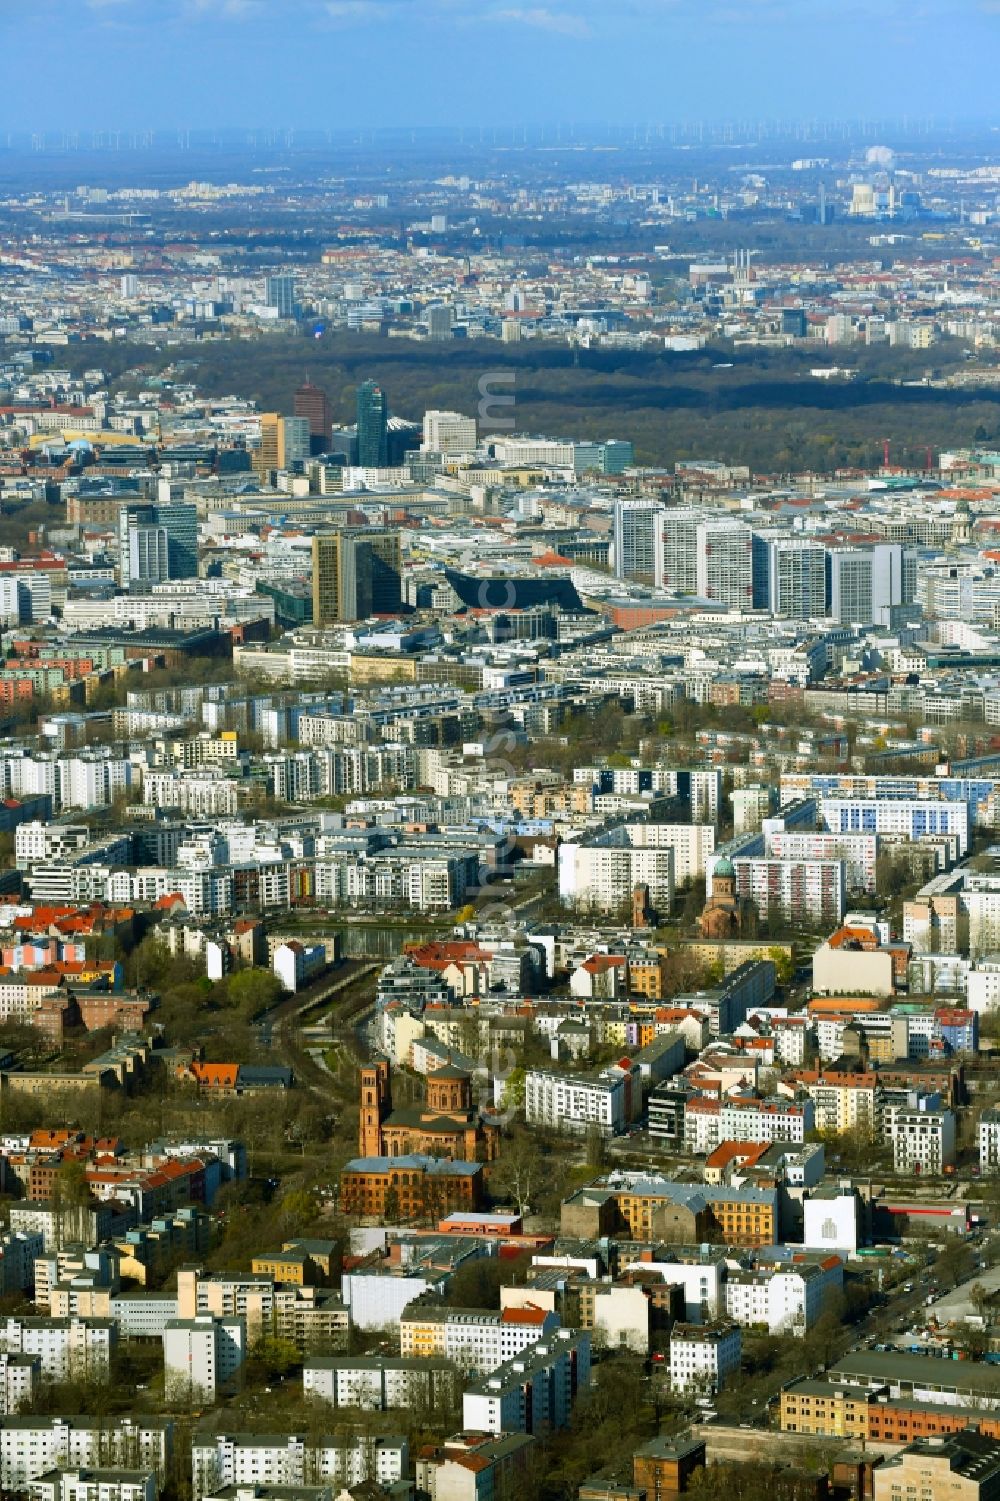 Berlin from above - City view of the inner city area from Kreuzberg with a view towards Tiergarten, Potsdamer Platz and Stadt West in Berlin, Germany